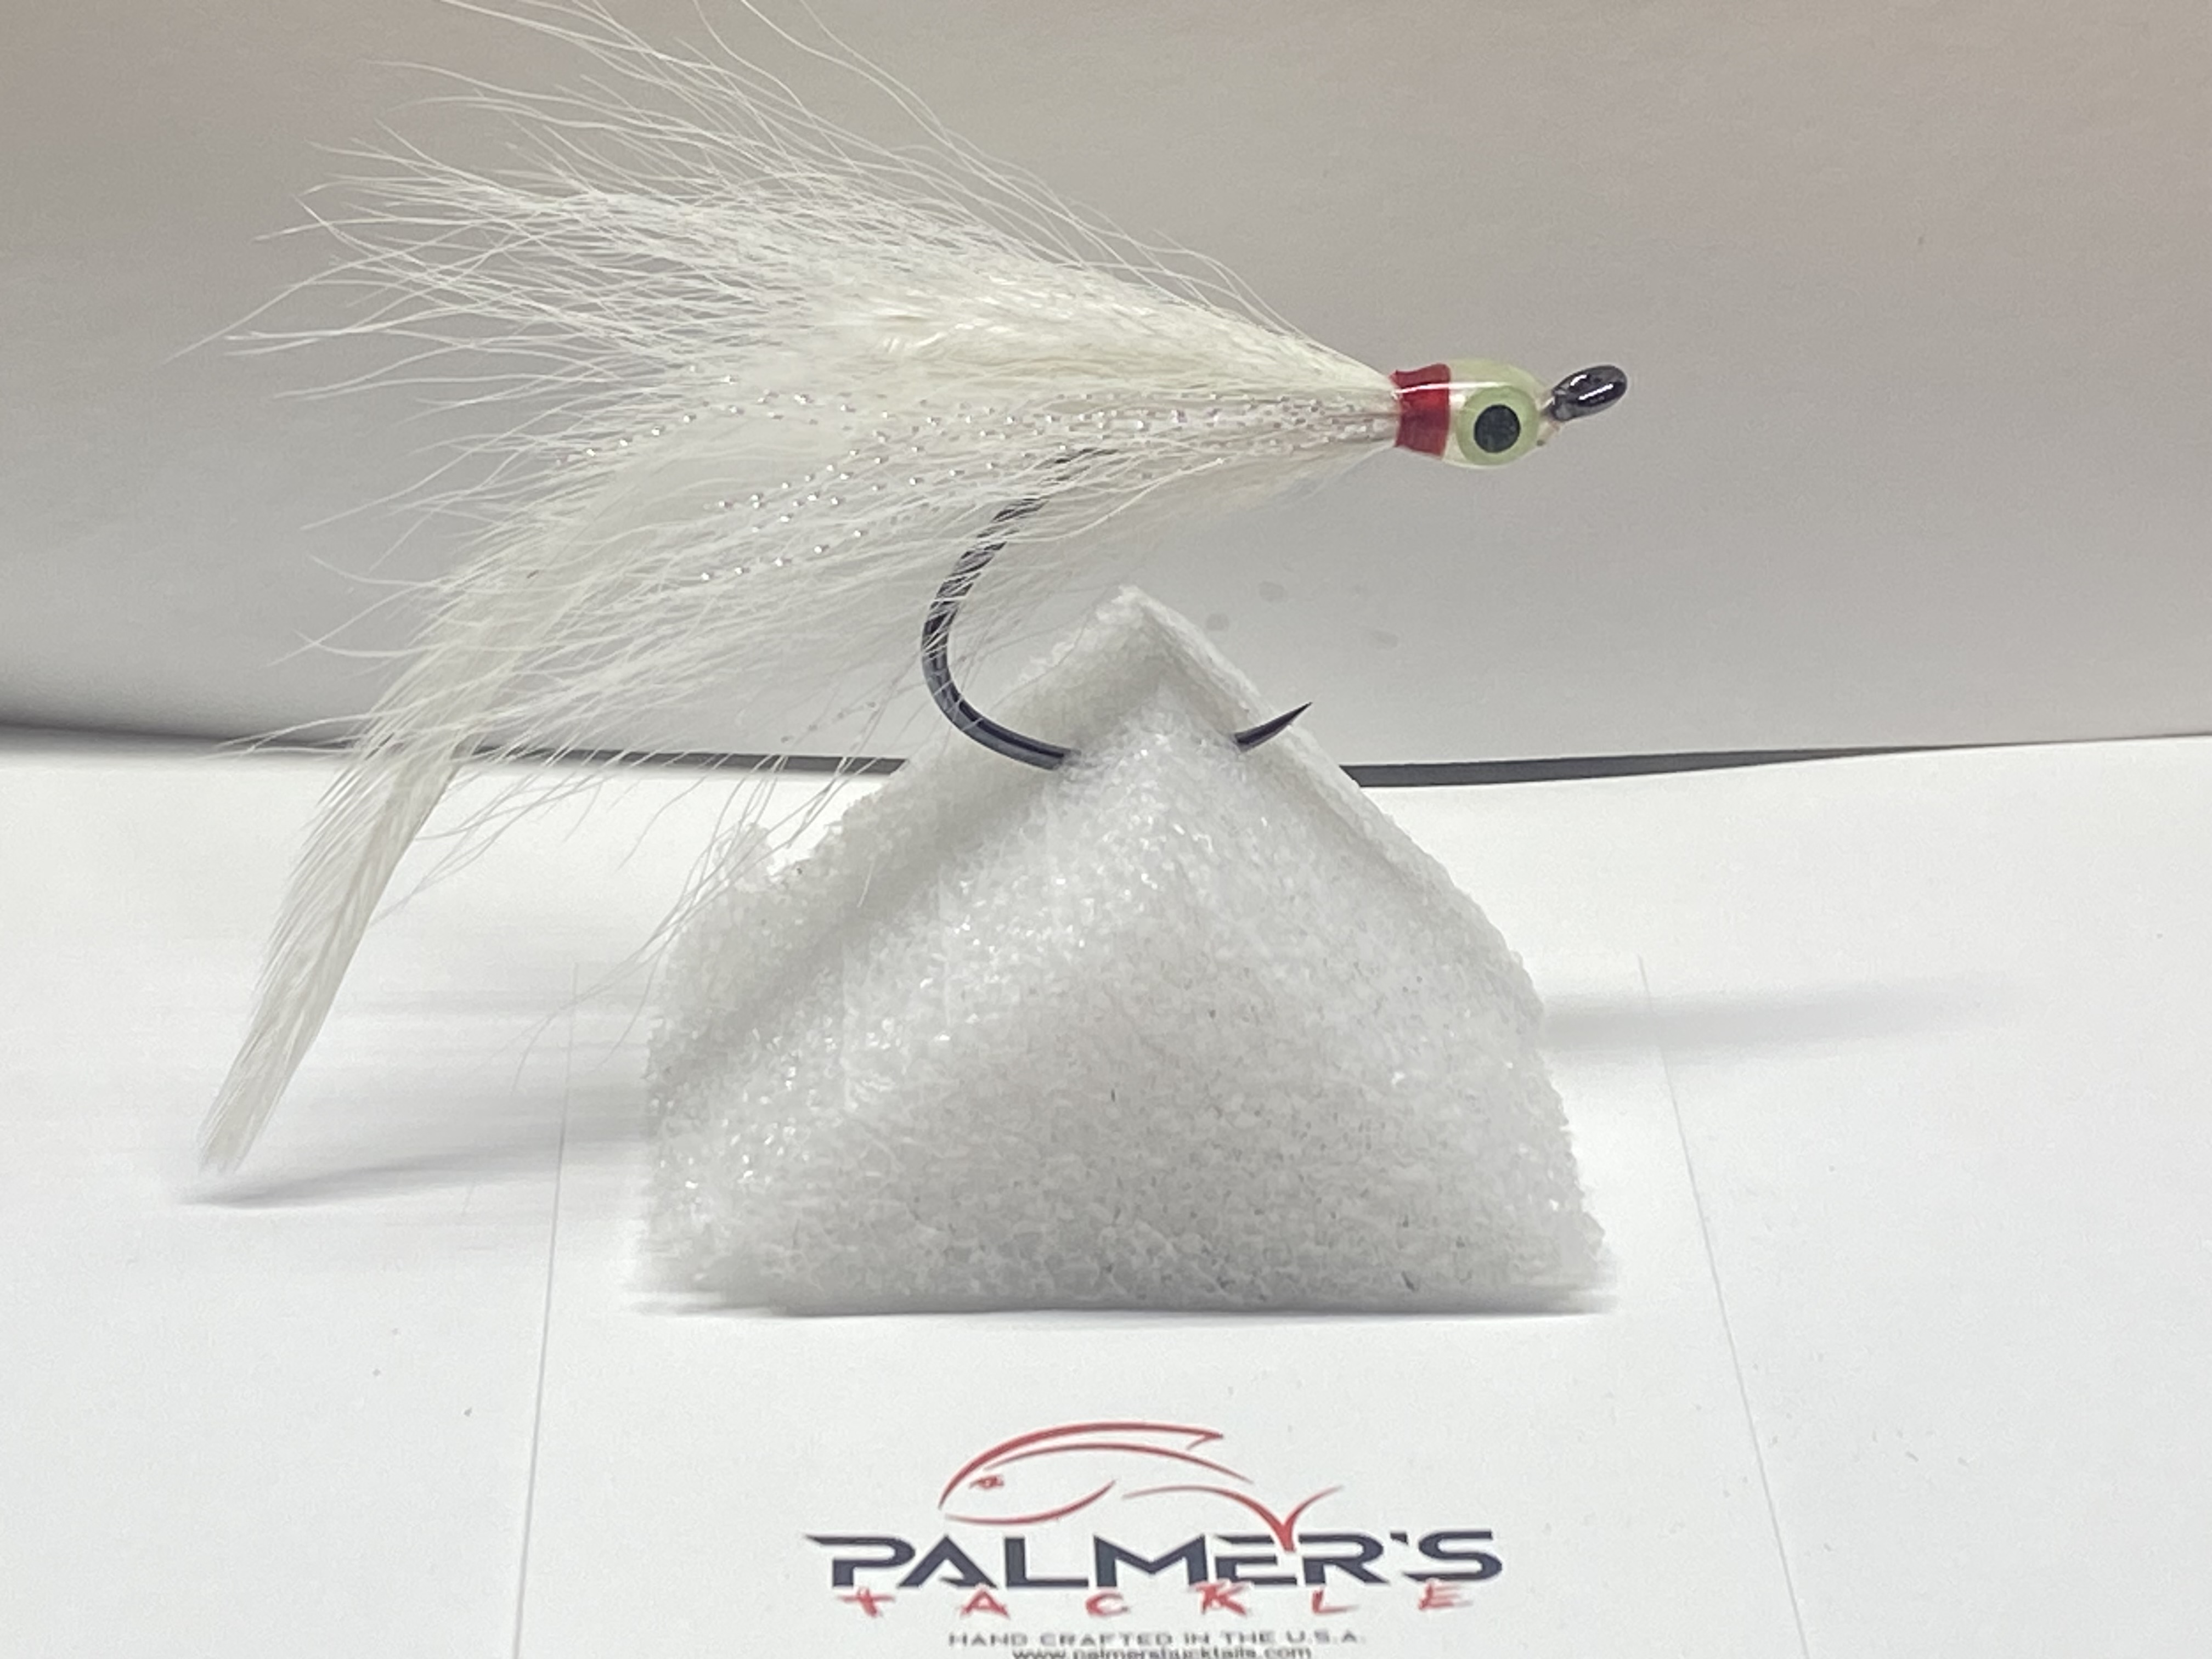 High Quality Saltwater Bucktails jigs, lures and fishing tackle for the  serious angler, specializing in hand tied saltwater bucktail jigs for  striped bass